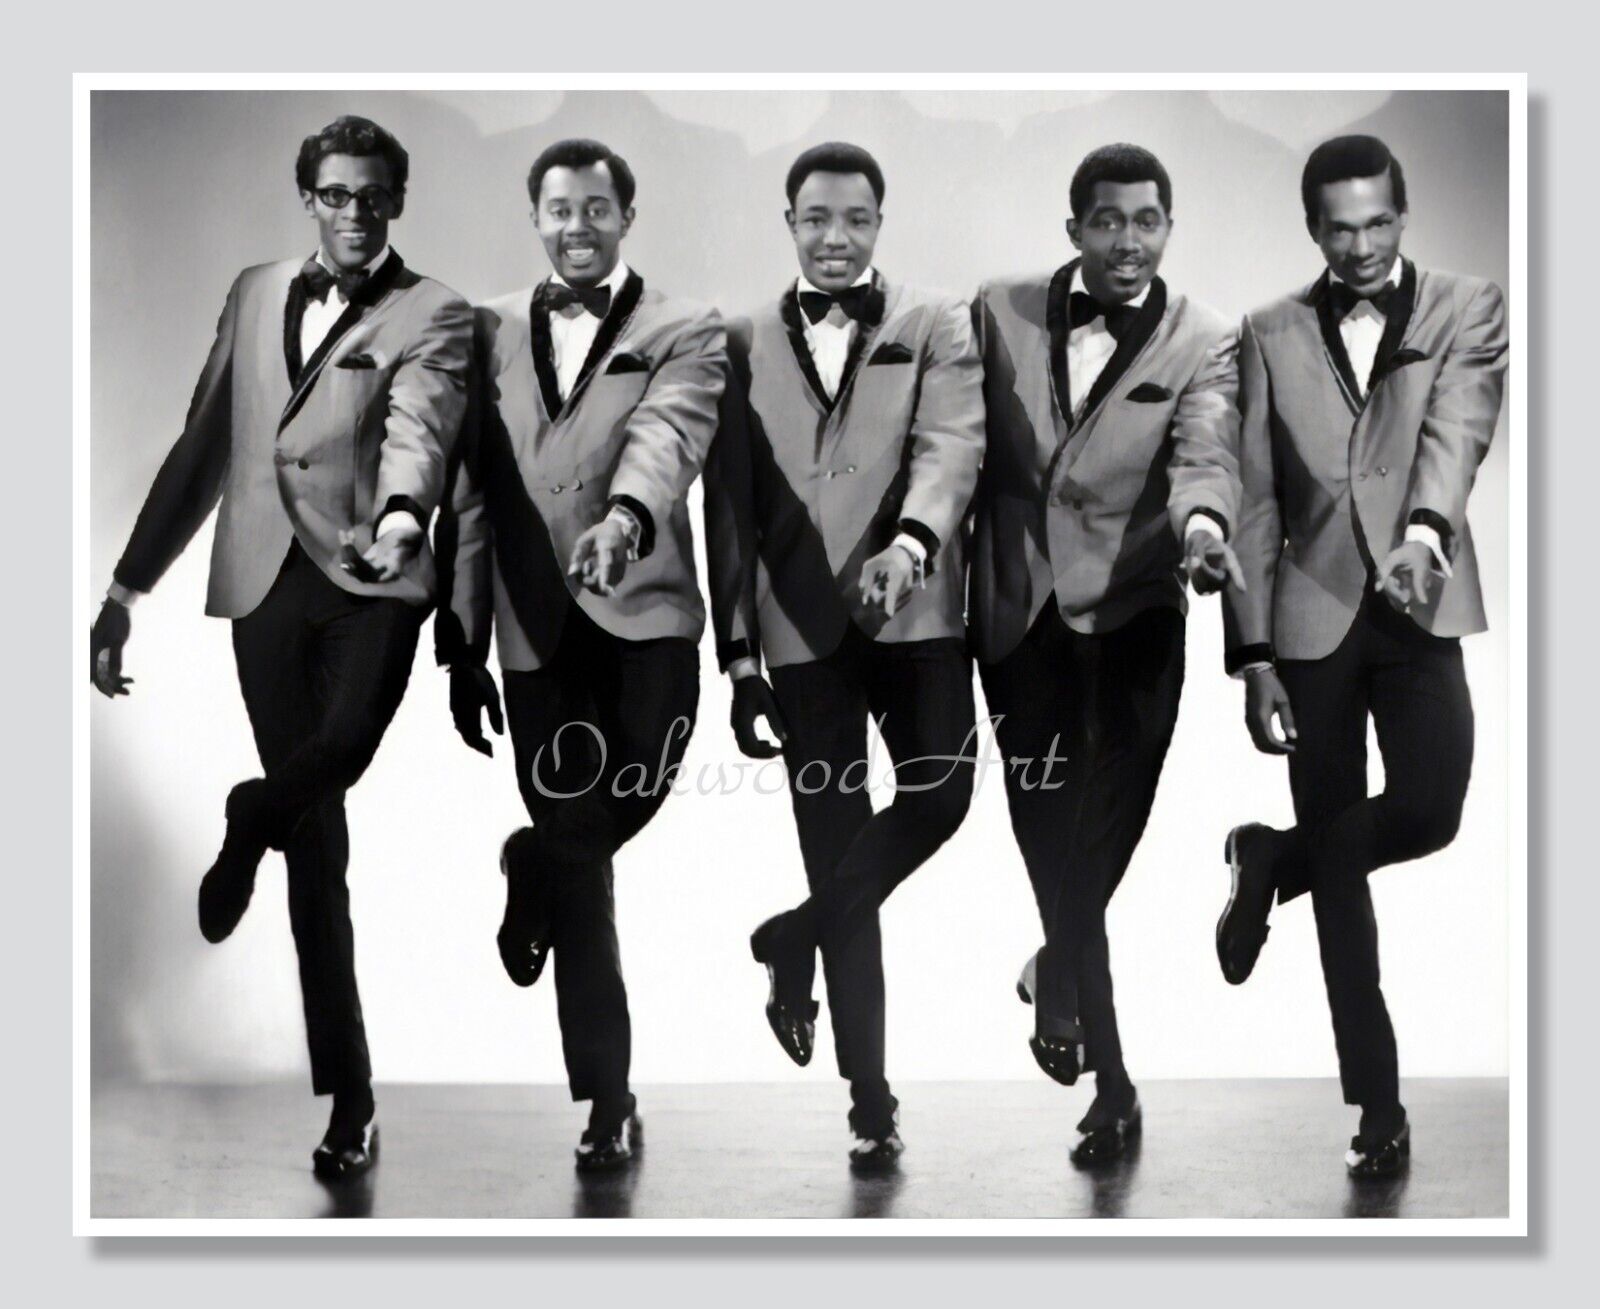 The Temptations c1968, R&B Music Group, African Americans, Vintage Photo Reprint